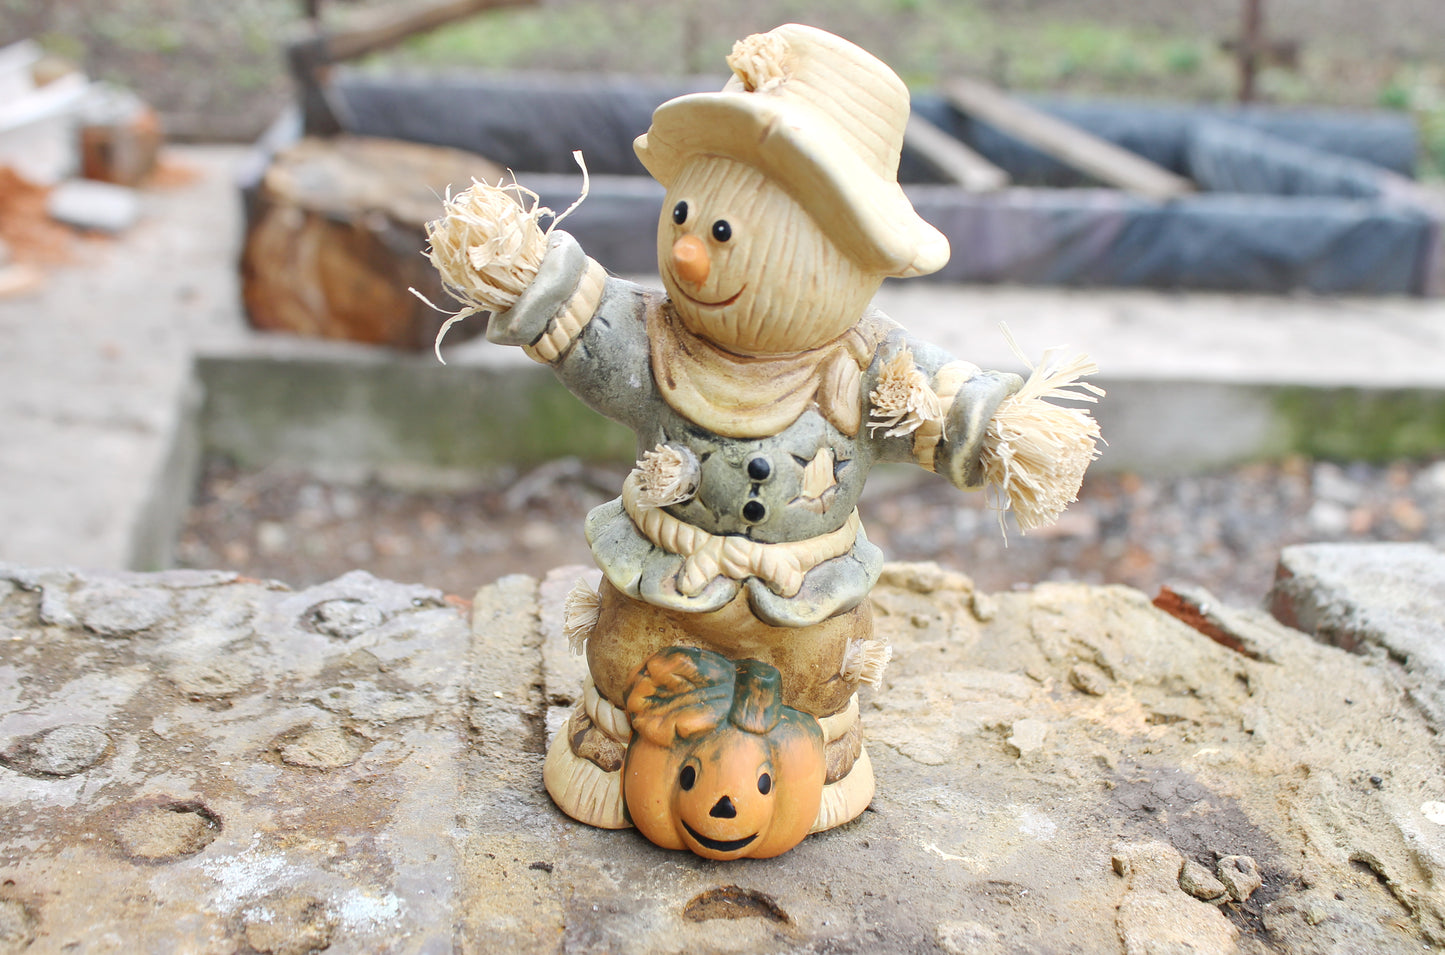 Vintage clay Scarecrow statue - 6.7 inches - Germany figurine - vintage decor - Germany vintage -1990s